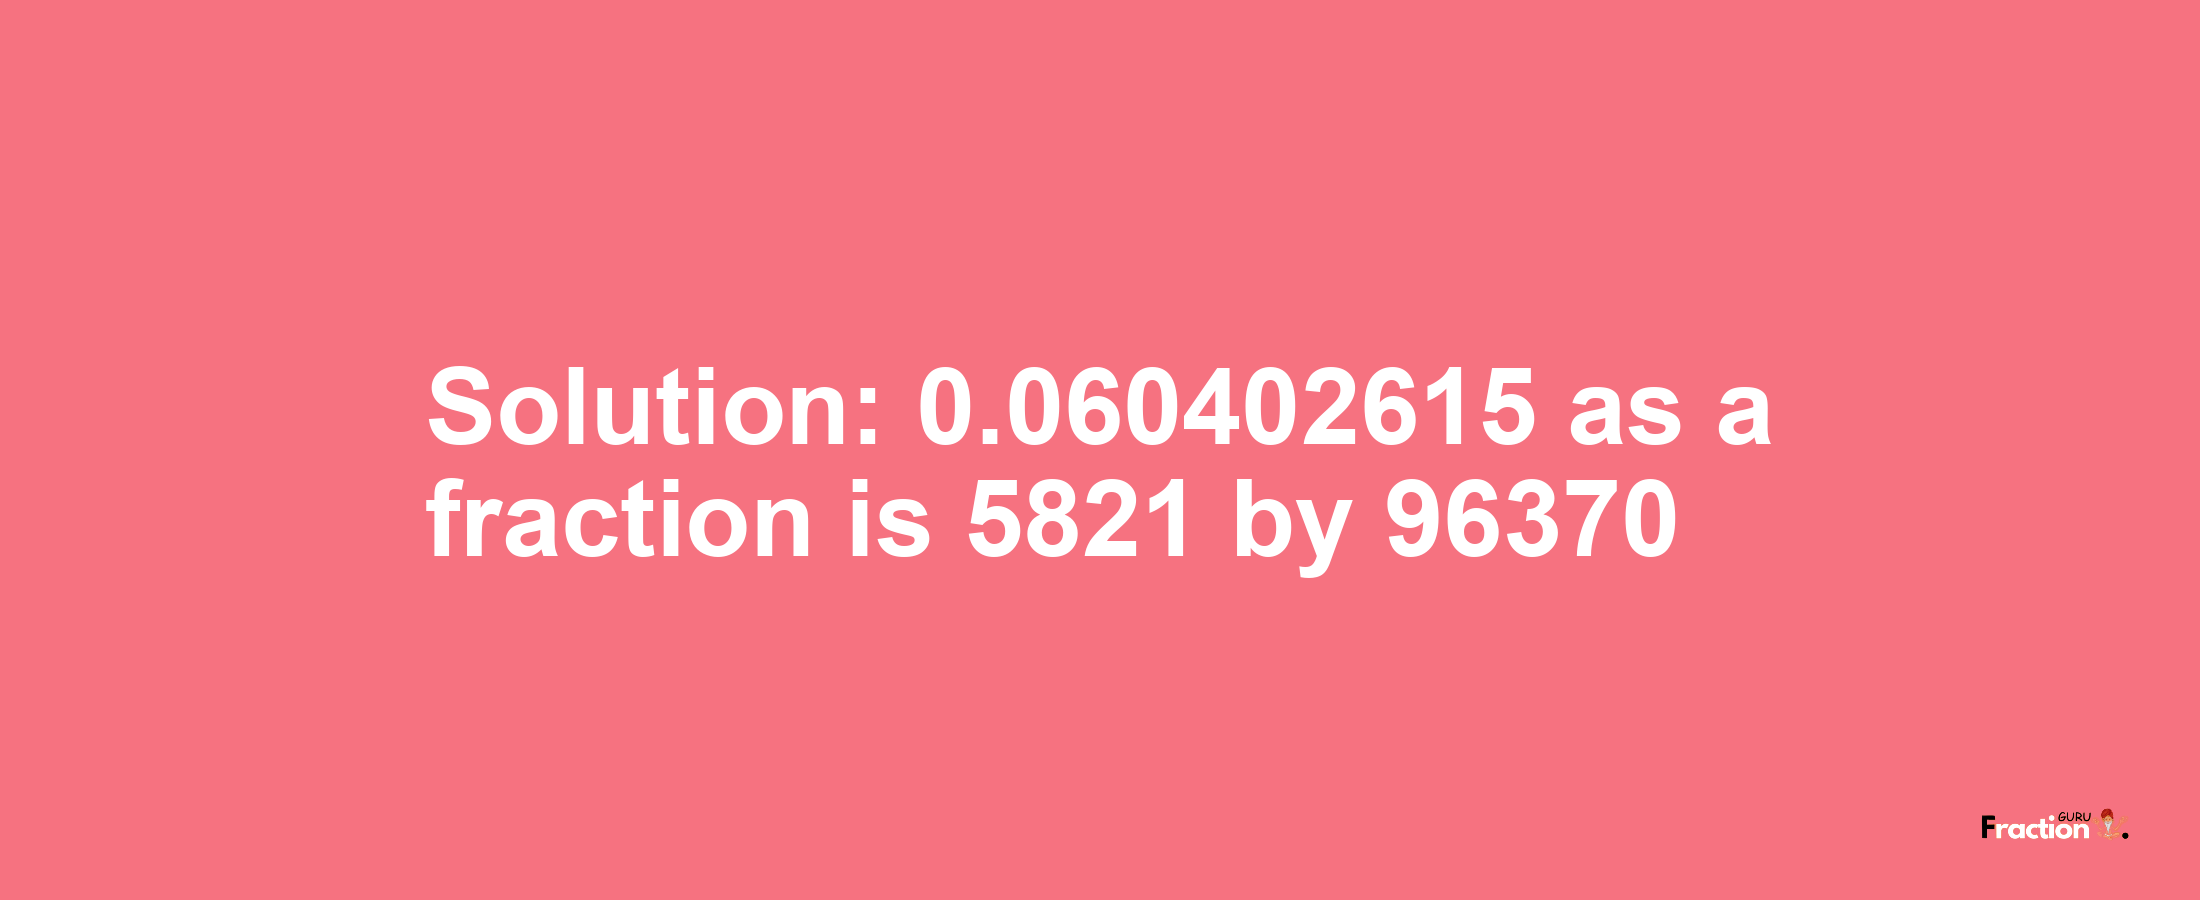 Solution:0.060402615 as a fraction is 5821/96370